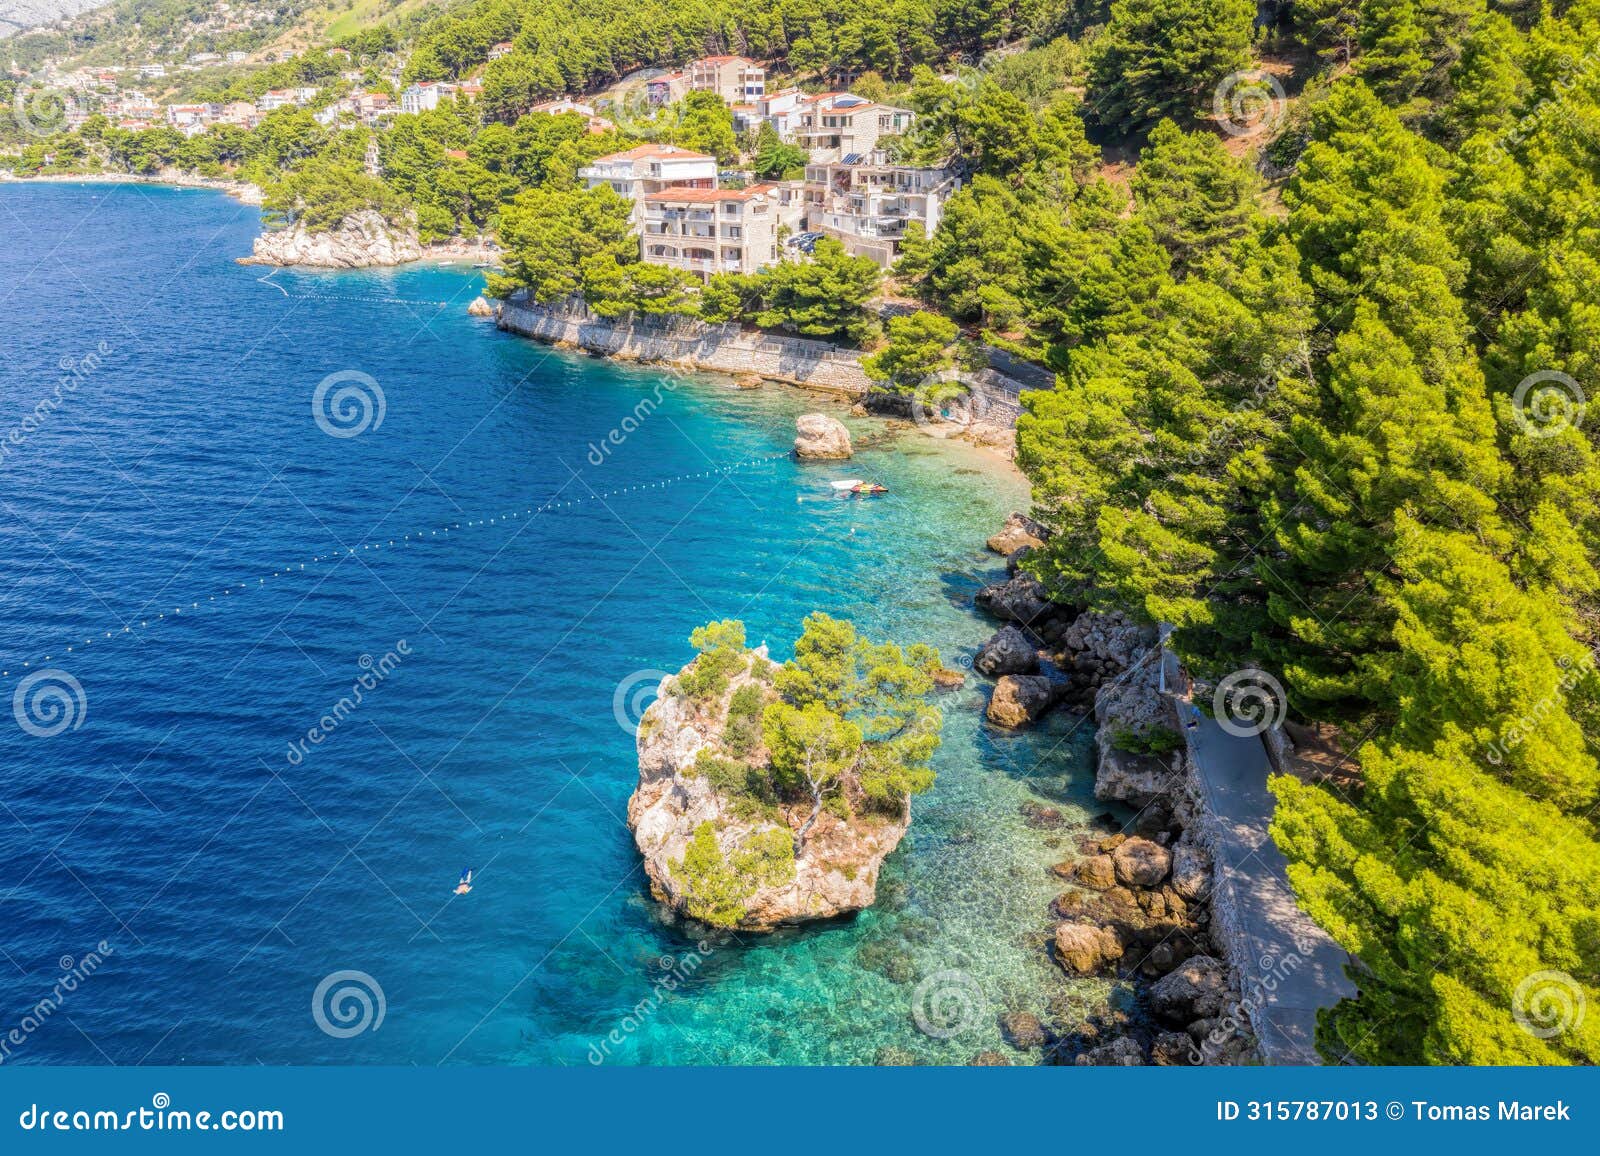 punta rata beach in brela, croatia, aerial view. adriatic sea with turquoise clean water and white sand on the beach